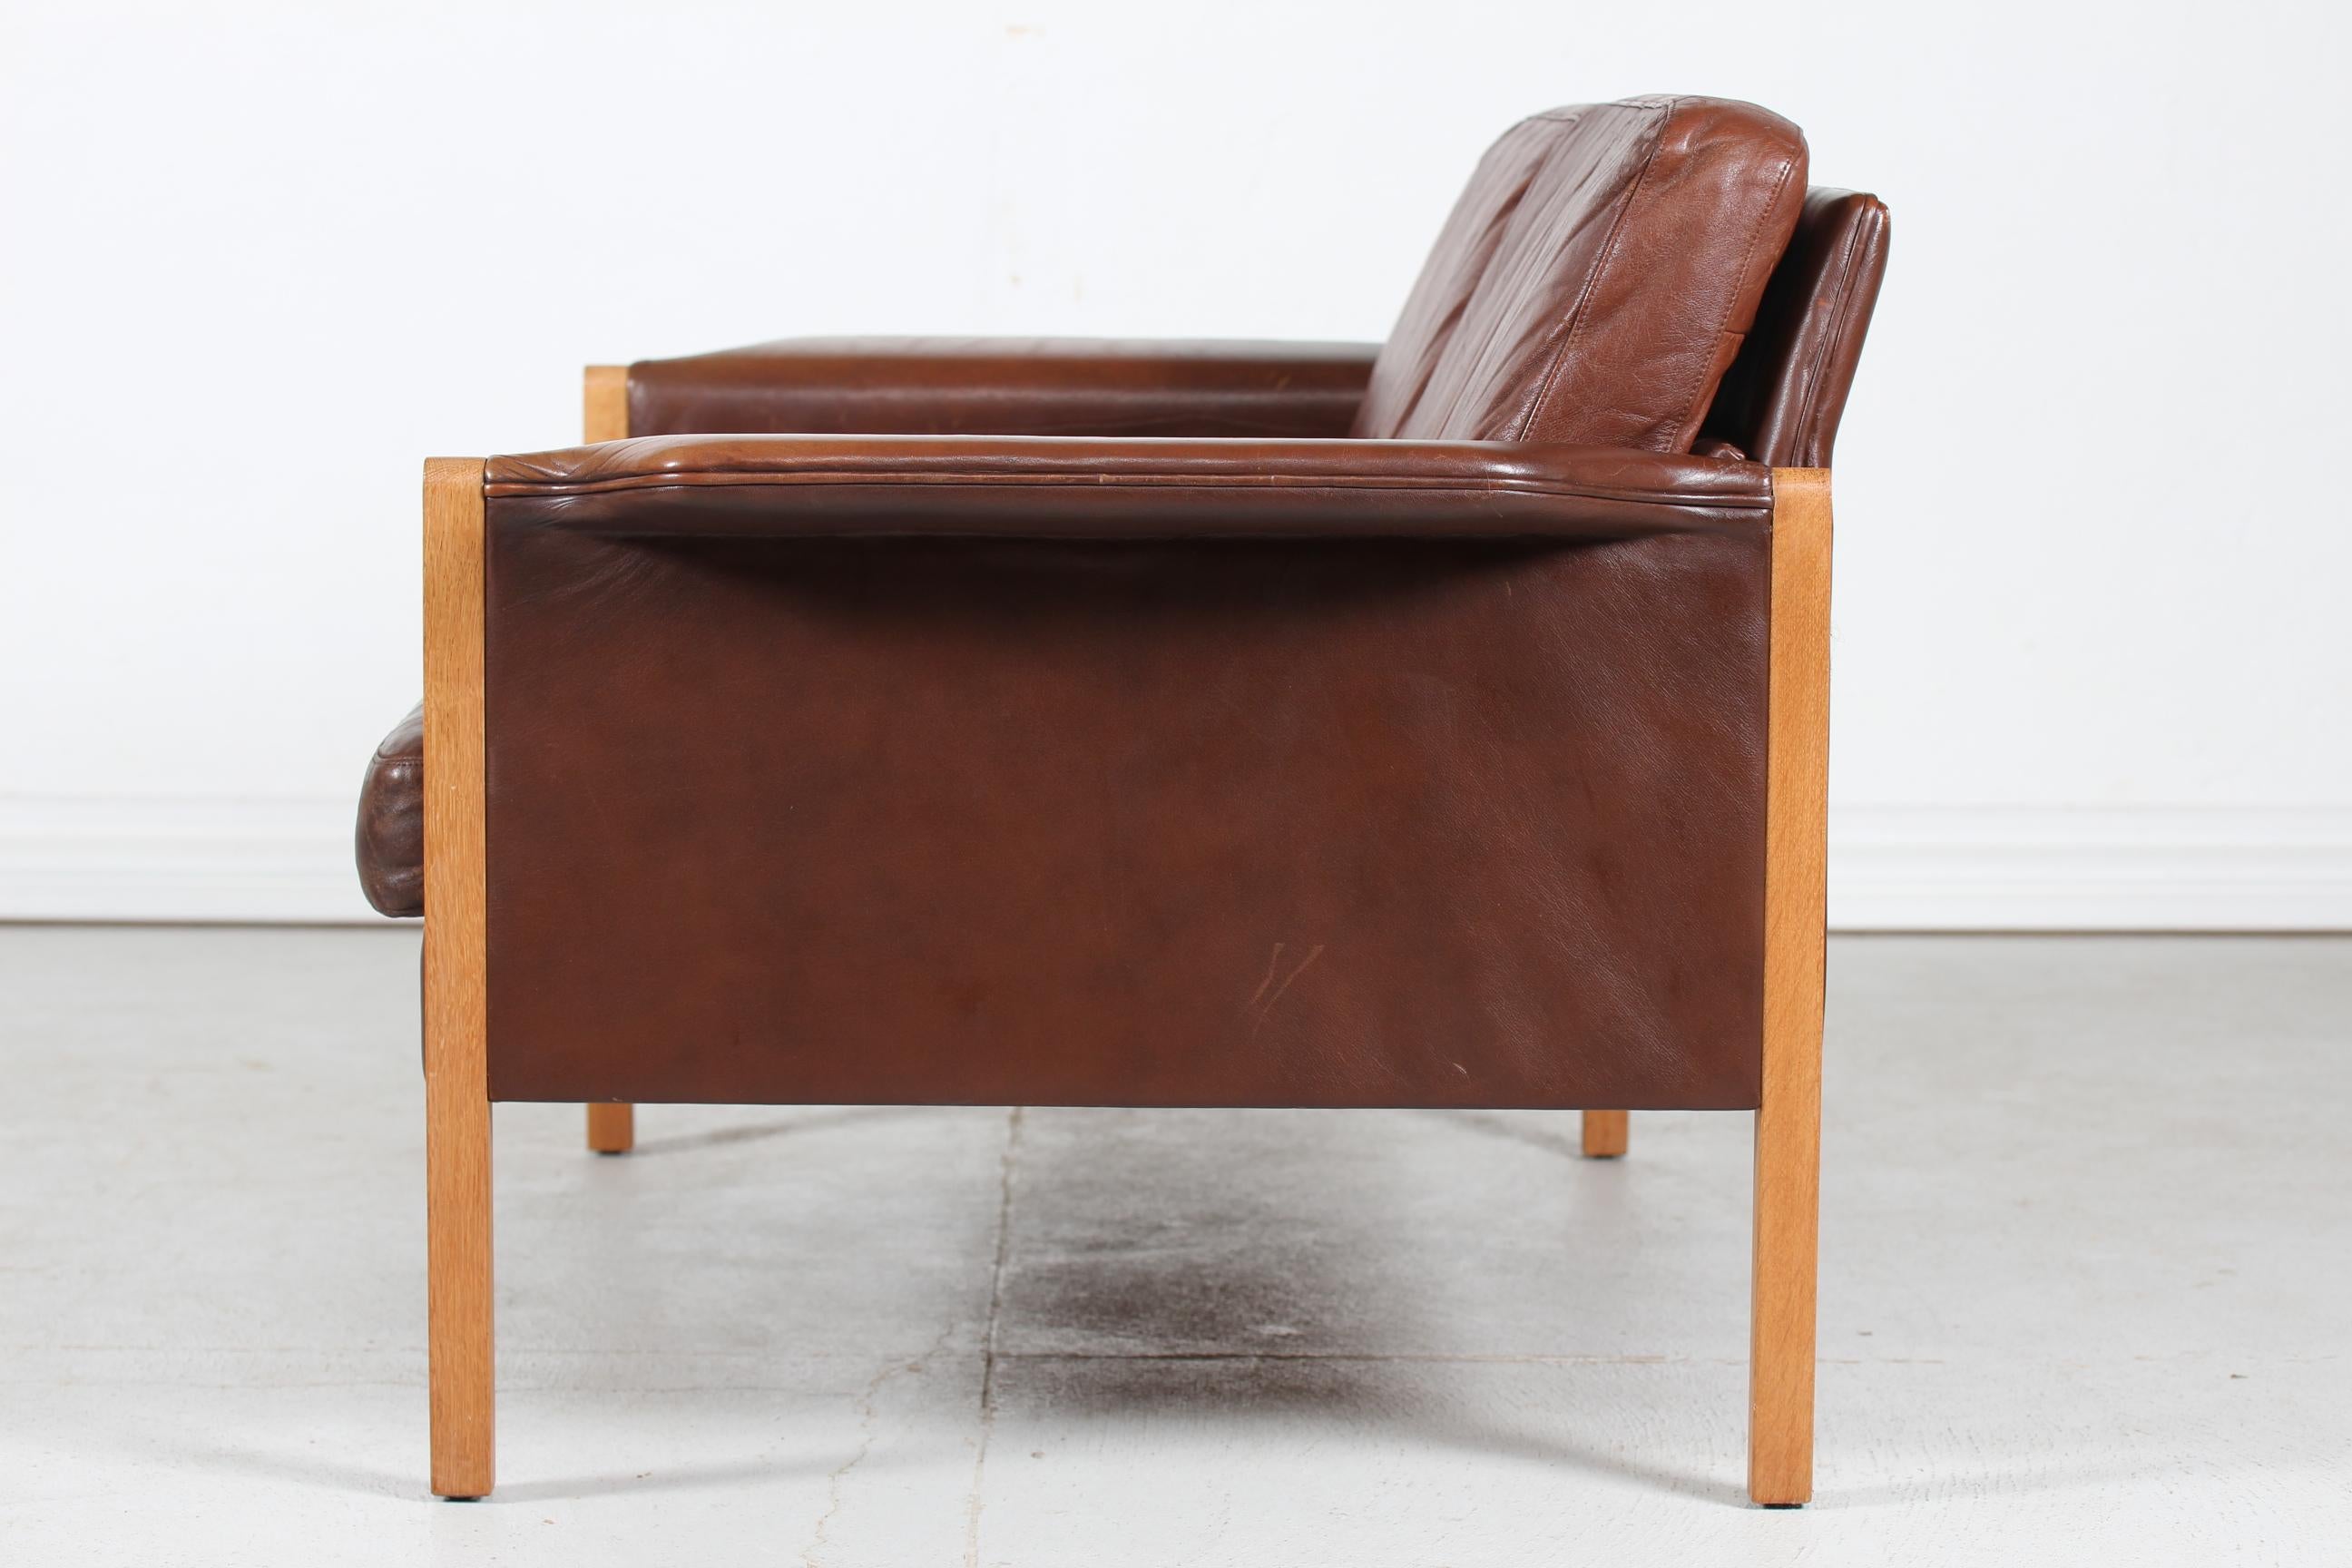 Finn Juhl style Two-Seat Sofa with Dark Cognac-Colored Leather Made in Denmark In Good Condition For Sale In Aarhus C, DK